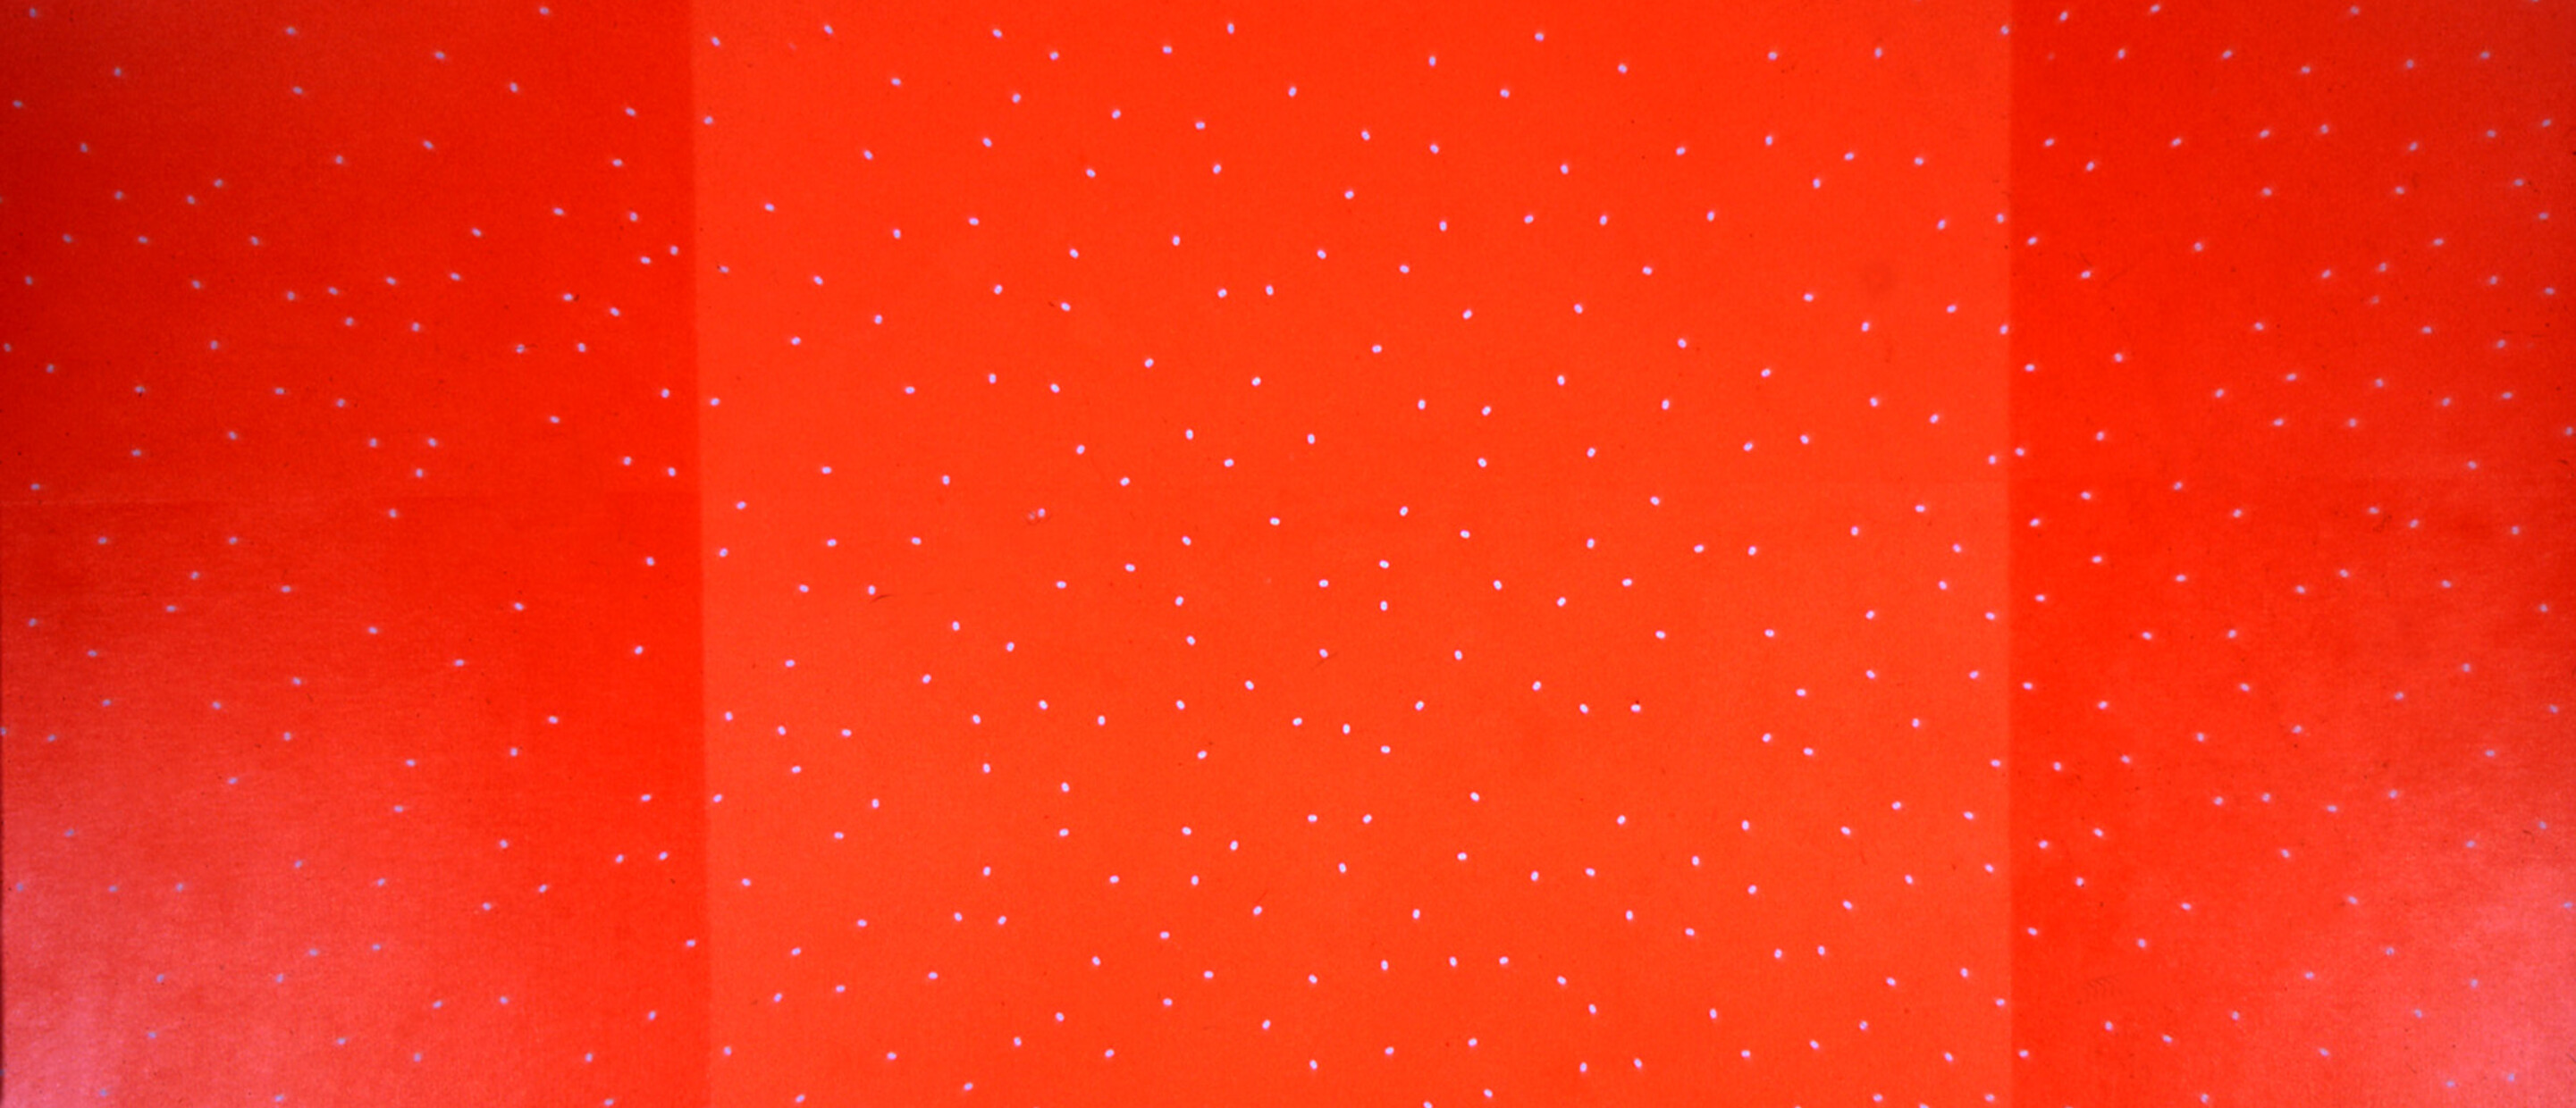 Multiple hues of red with dots painted on canvas